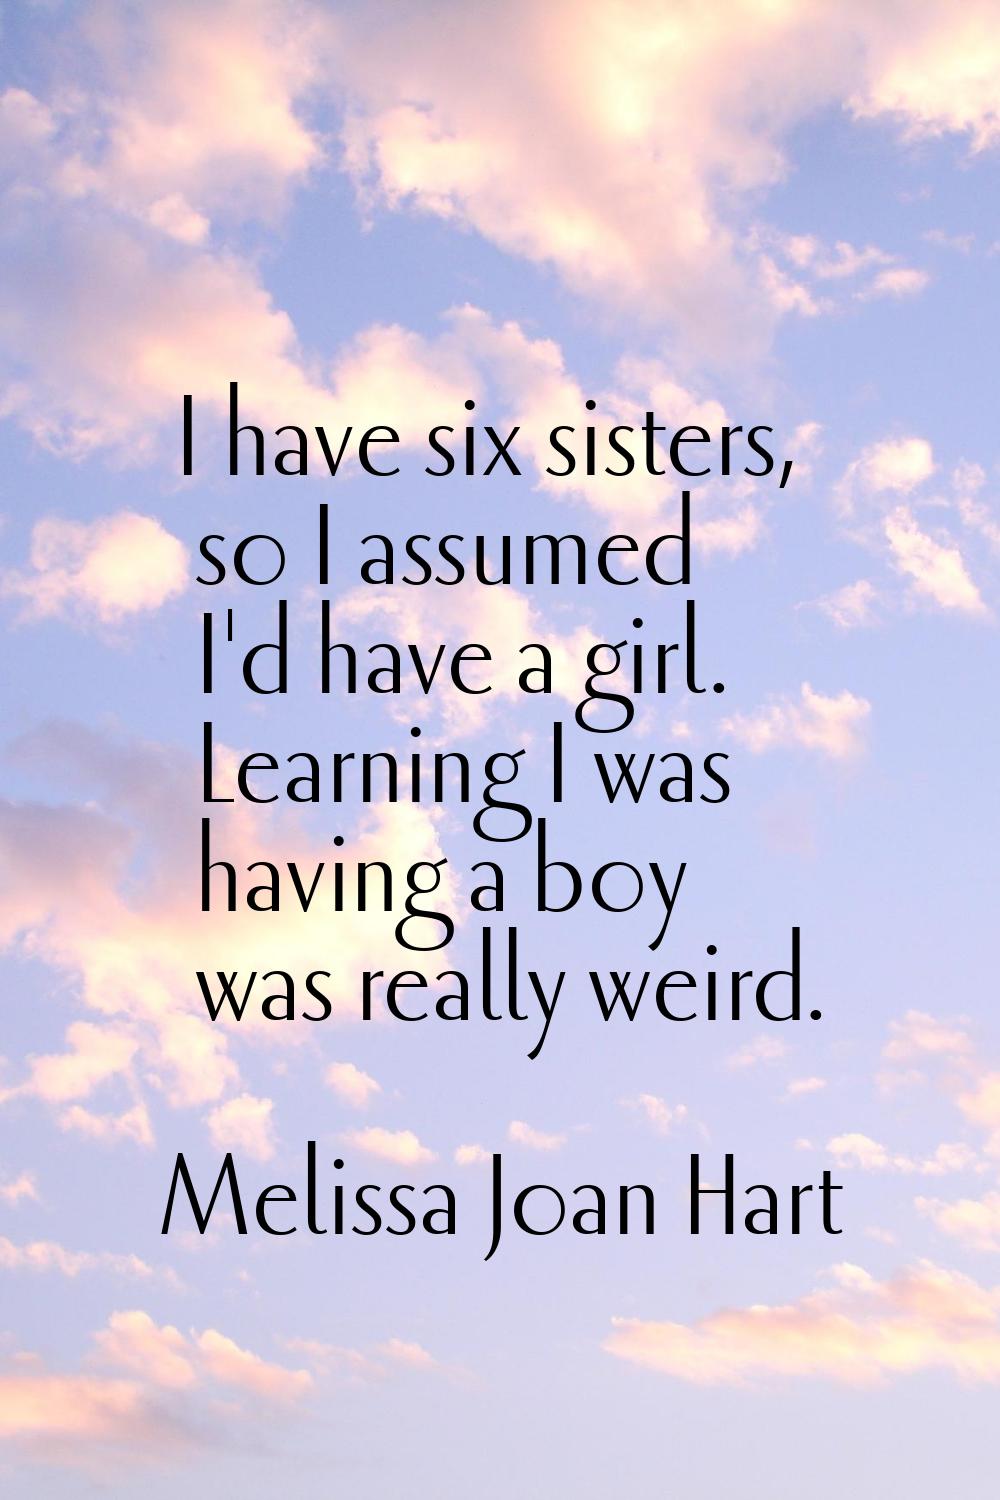 I have six sisters, so I assumed I'd have a girl. Learning I was having a boy was really weird.